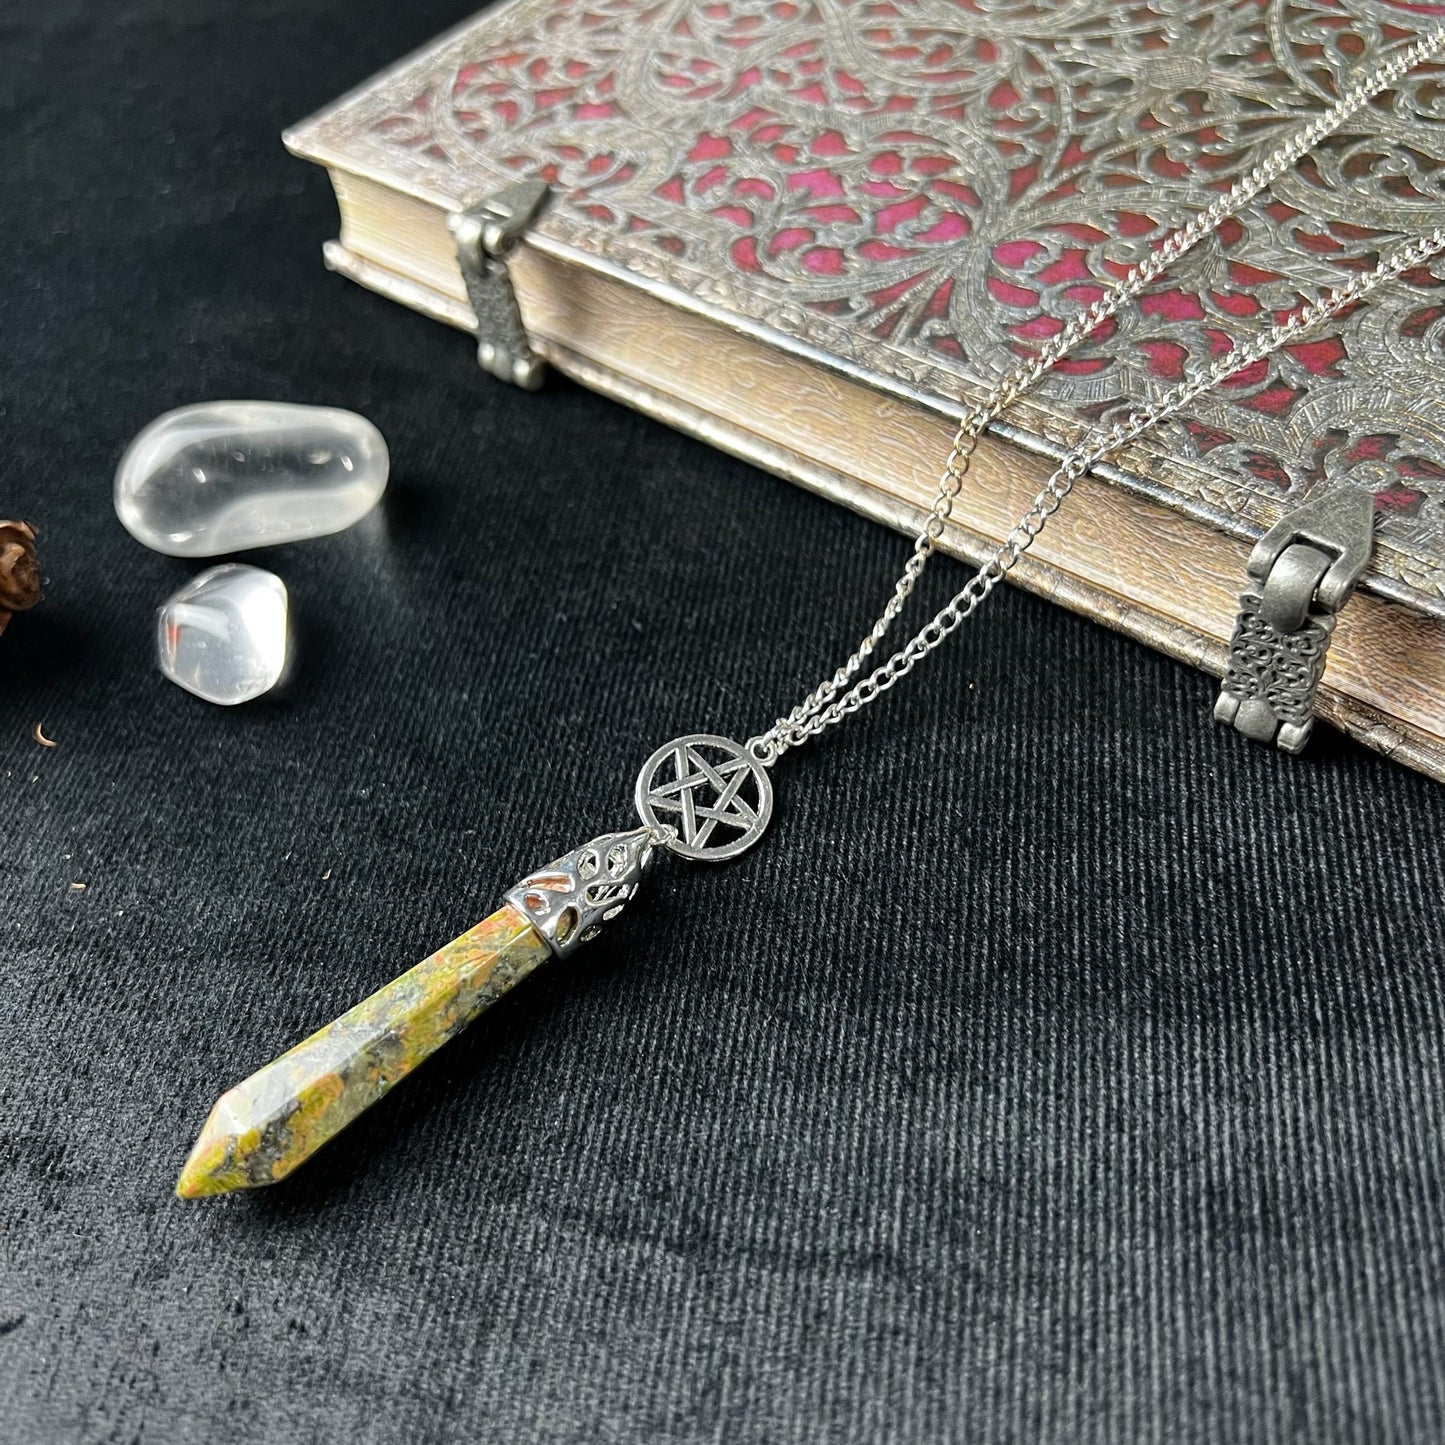 Unakite and pentacle pendulum necklace - The French Witch shop